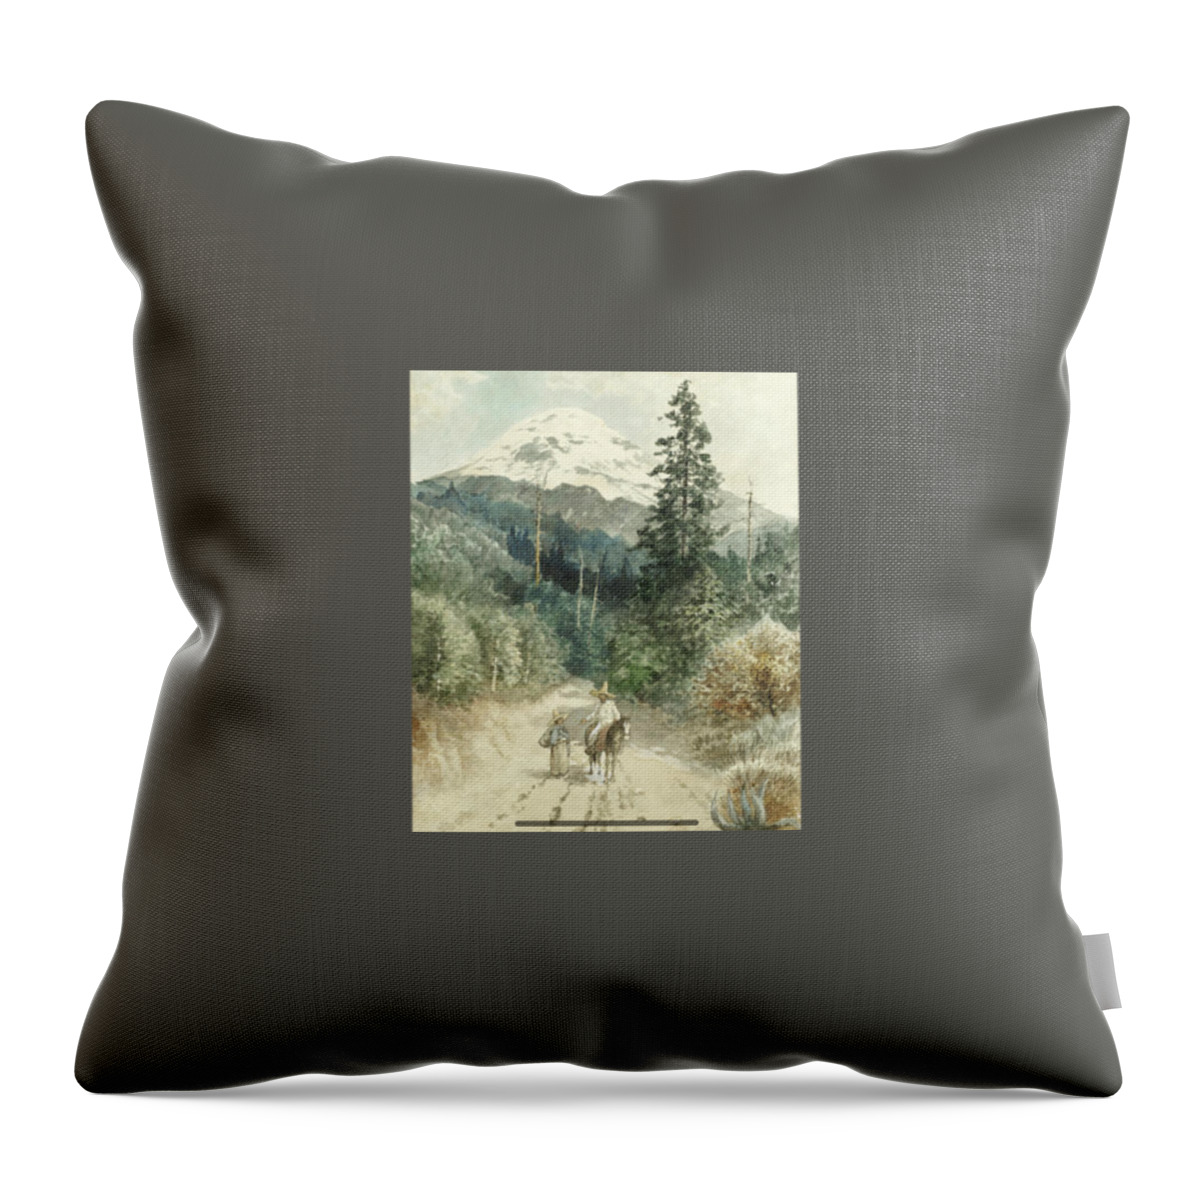 August LÖhr (german Throw Pillow featuring the painting A view of Popocatepetl by MotionAge Designs